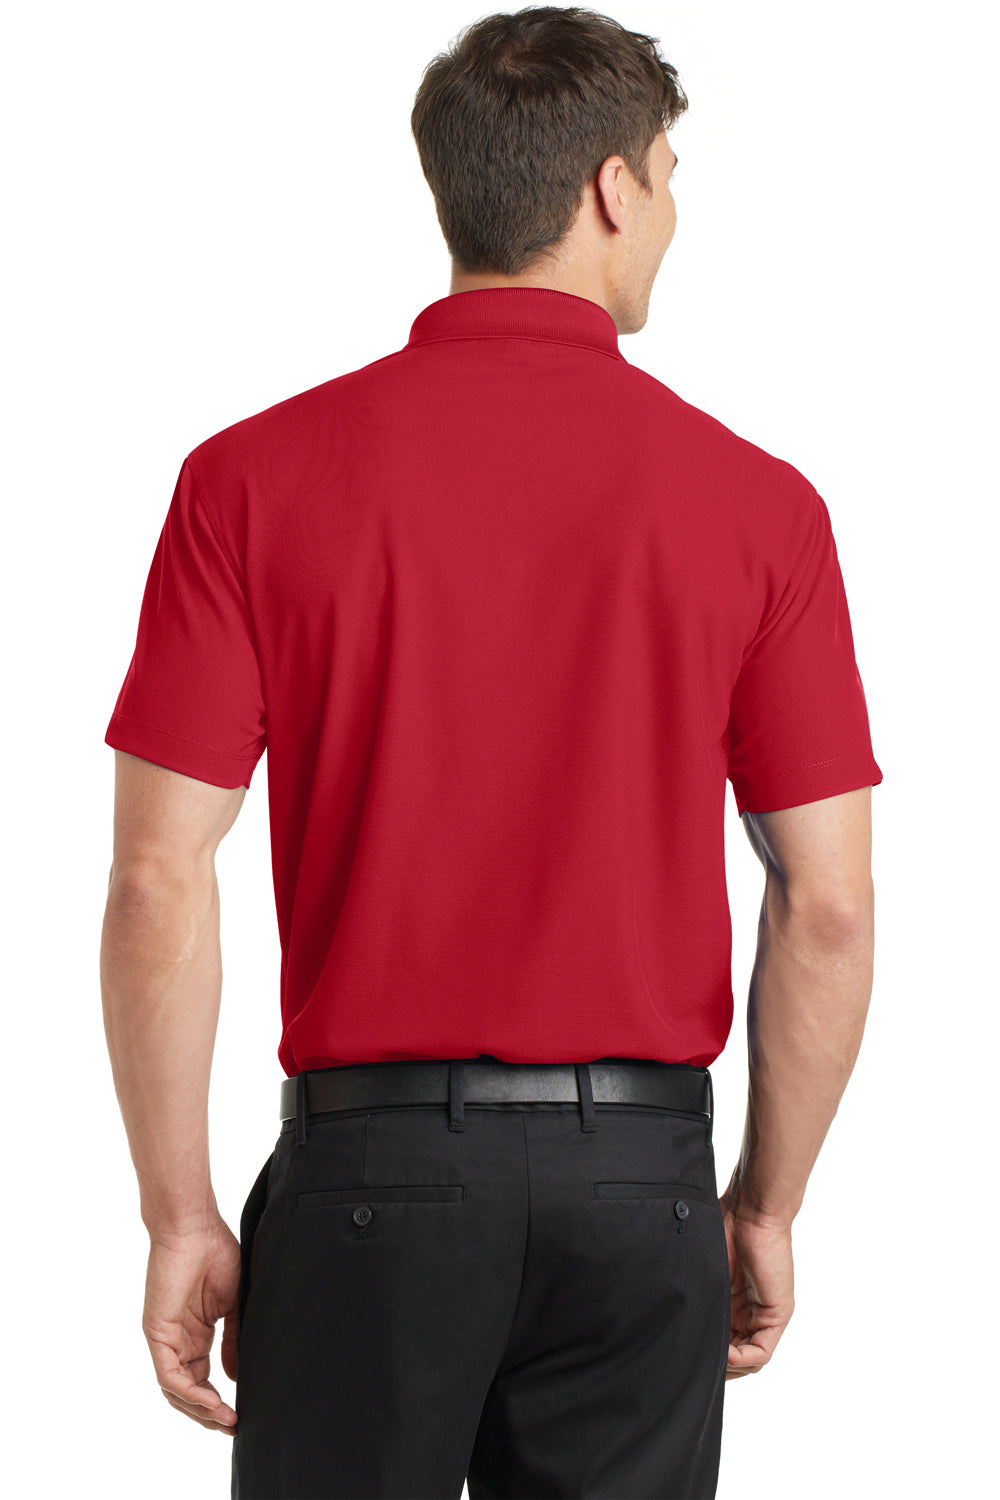 Port Authority K572 Mens Dry Zone Moisture Wicking Short Sleeve Polo Shirt Red Back